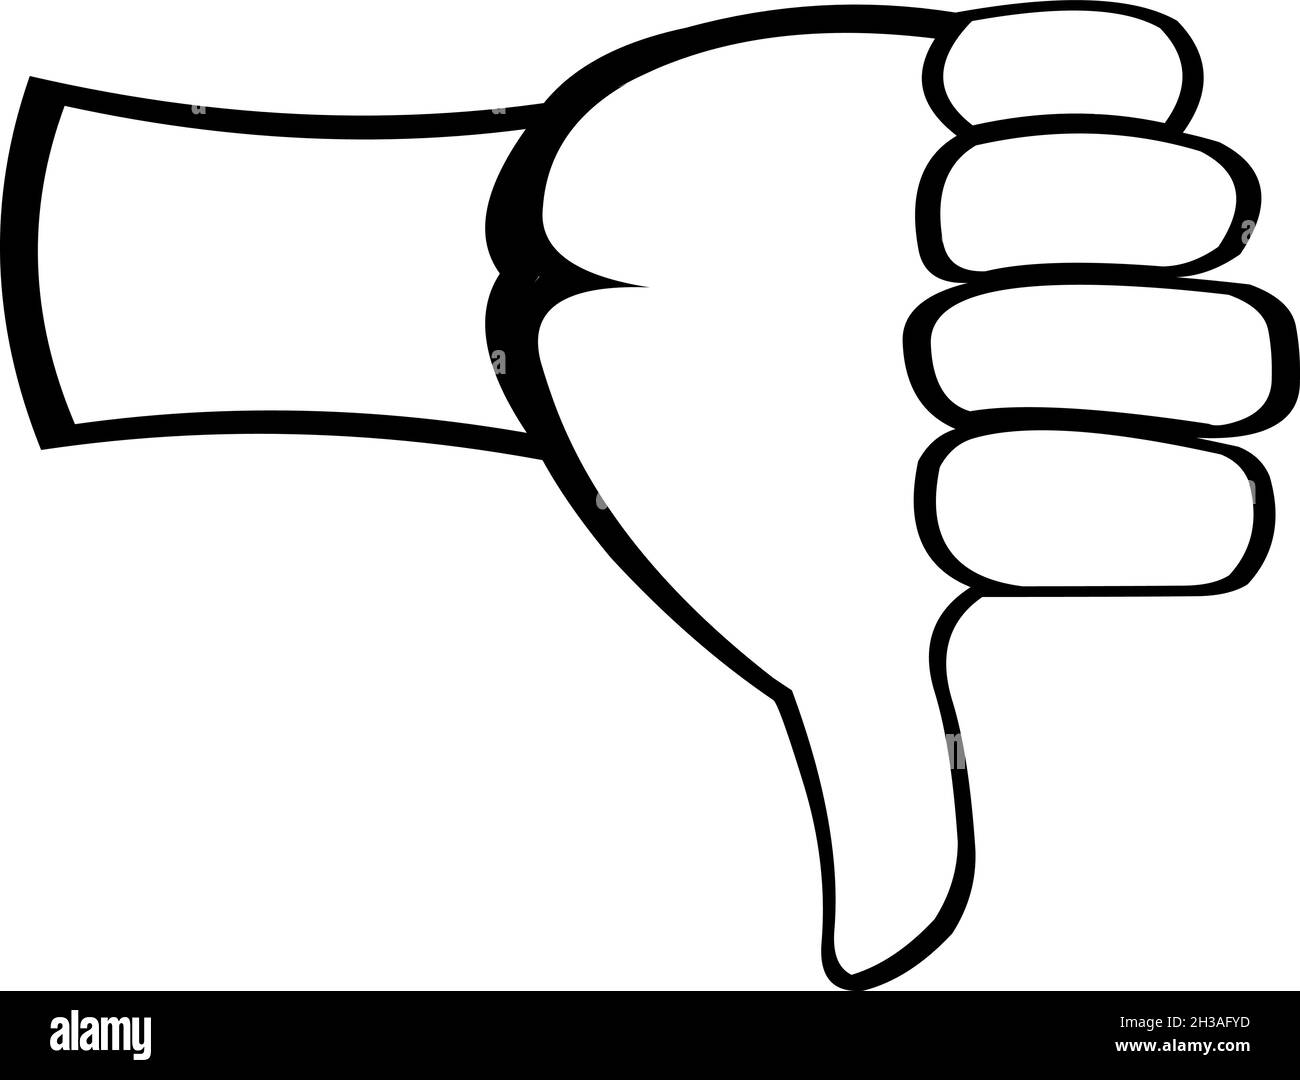 Vector illustration of a hand with I doubt thumb down in black and white, with outlines drawn Stock Vector